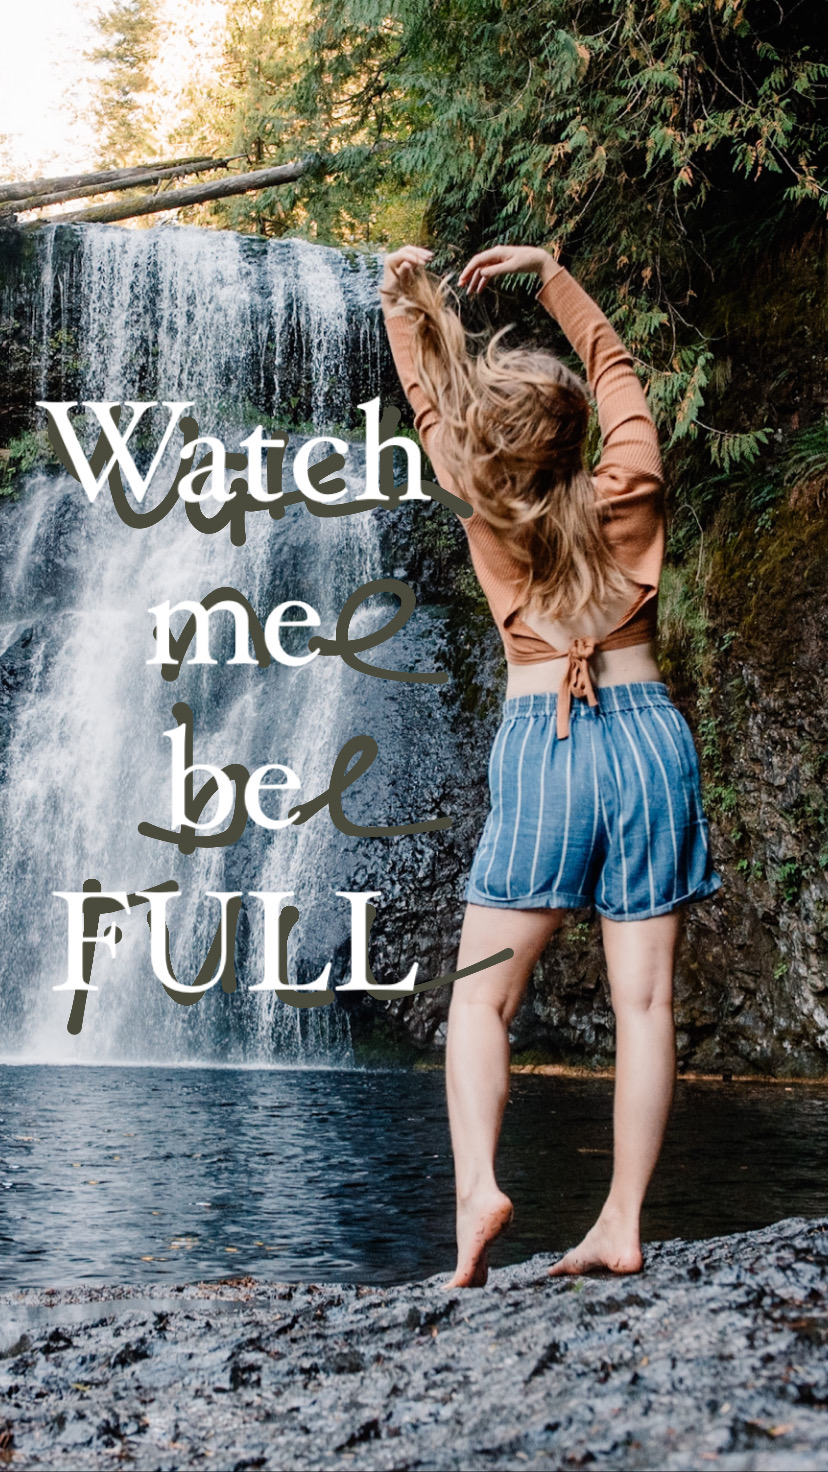 Lumalia standing near a waterfall with the text over that says "watch me be full"